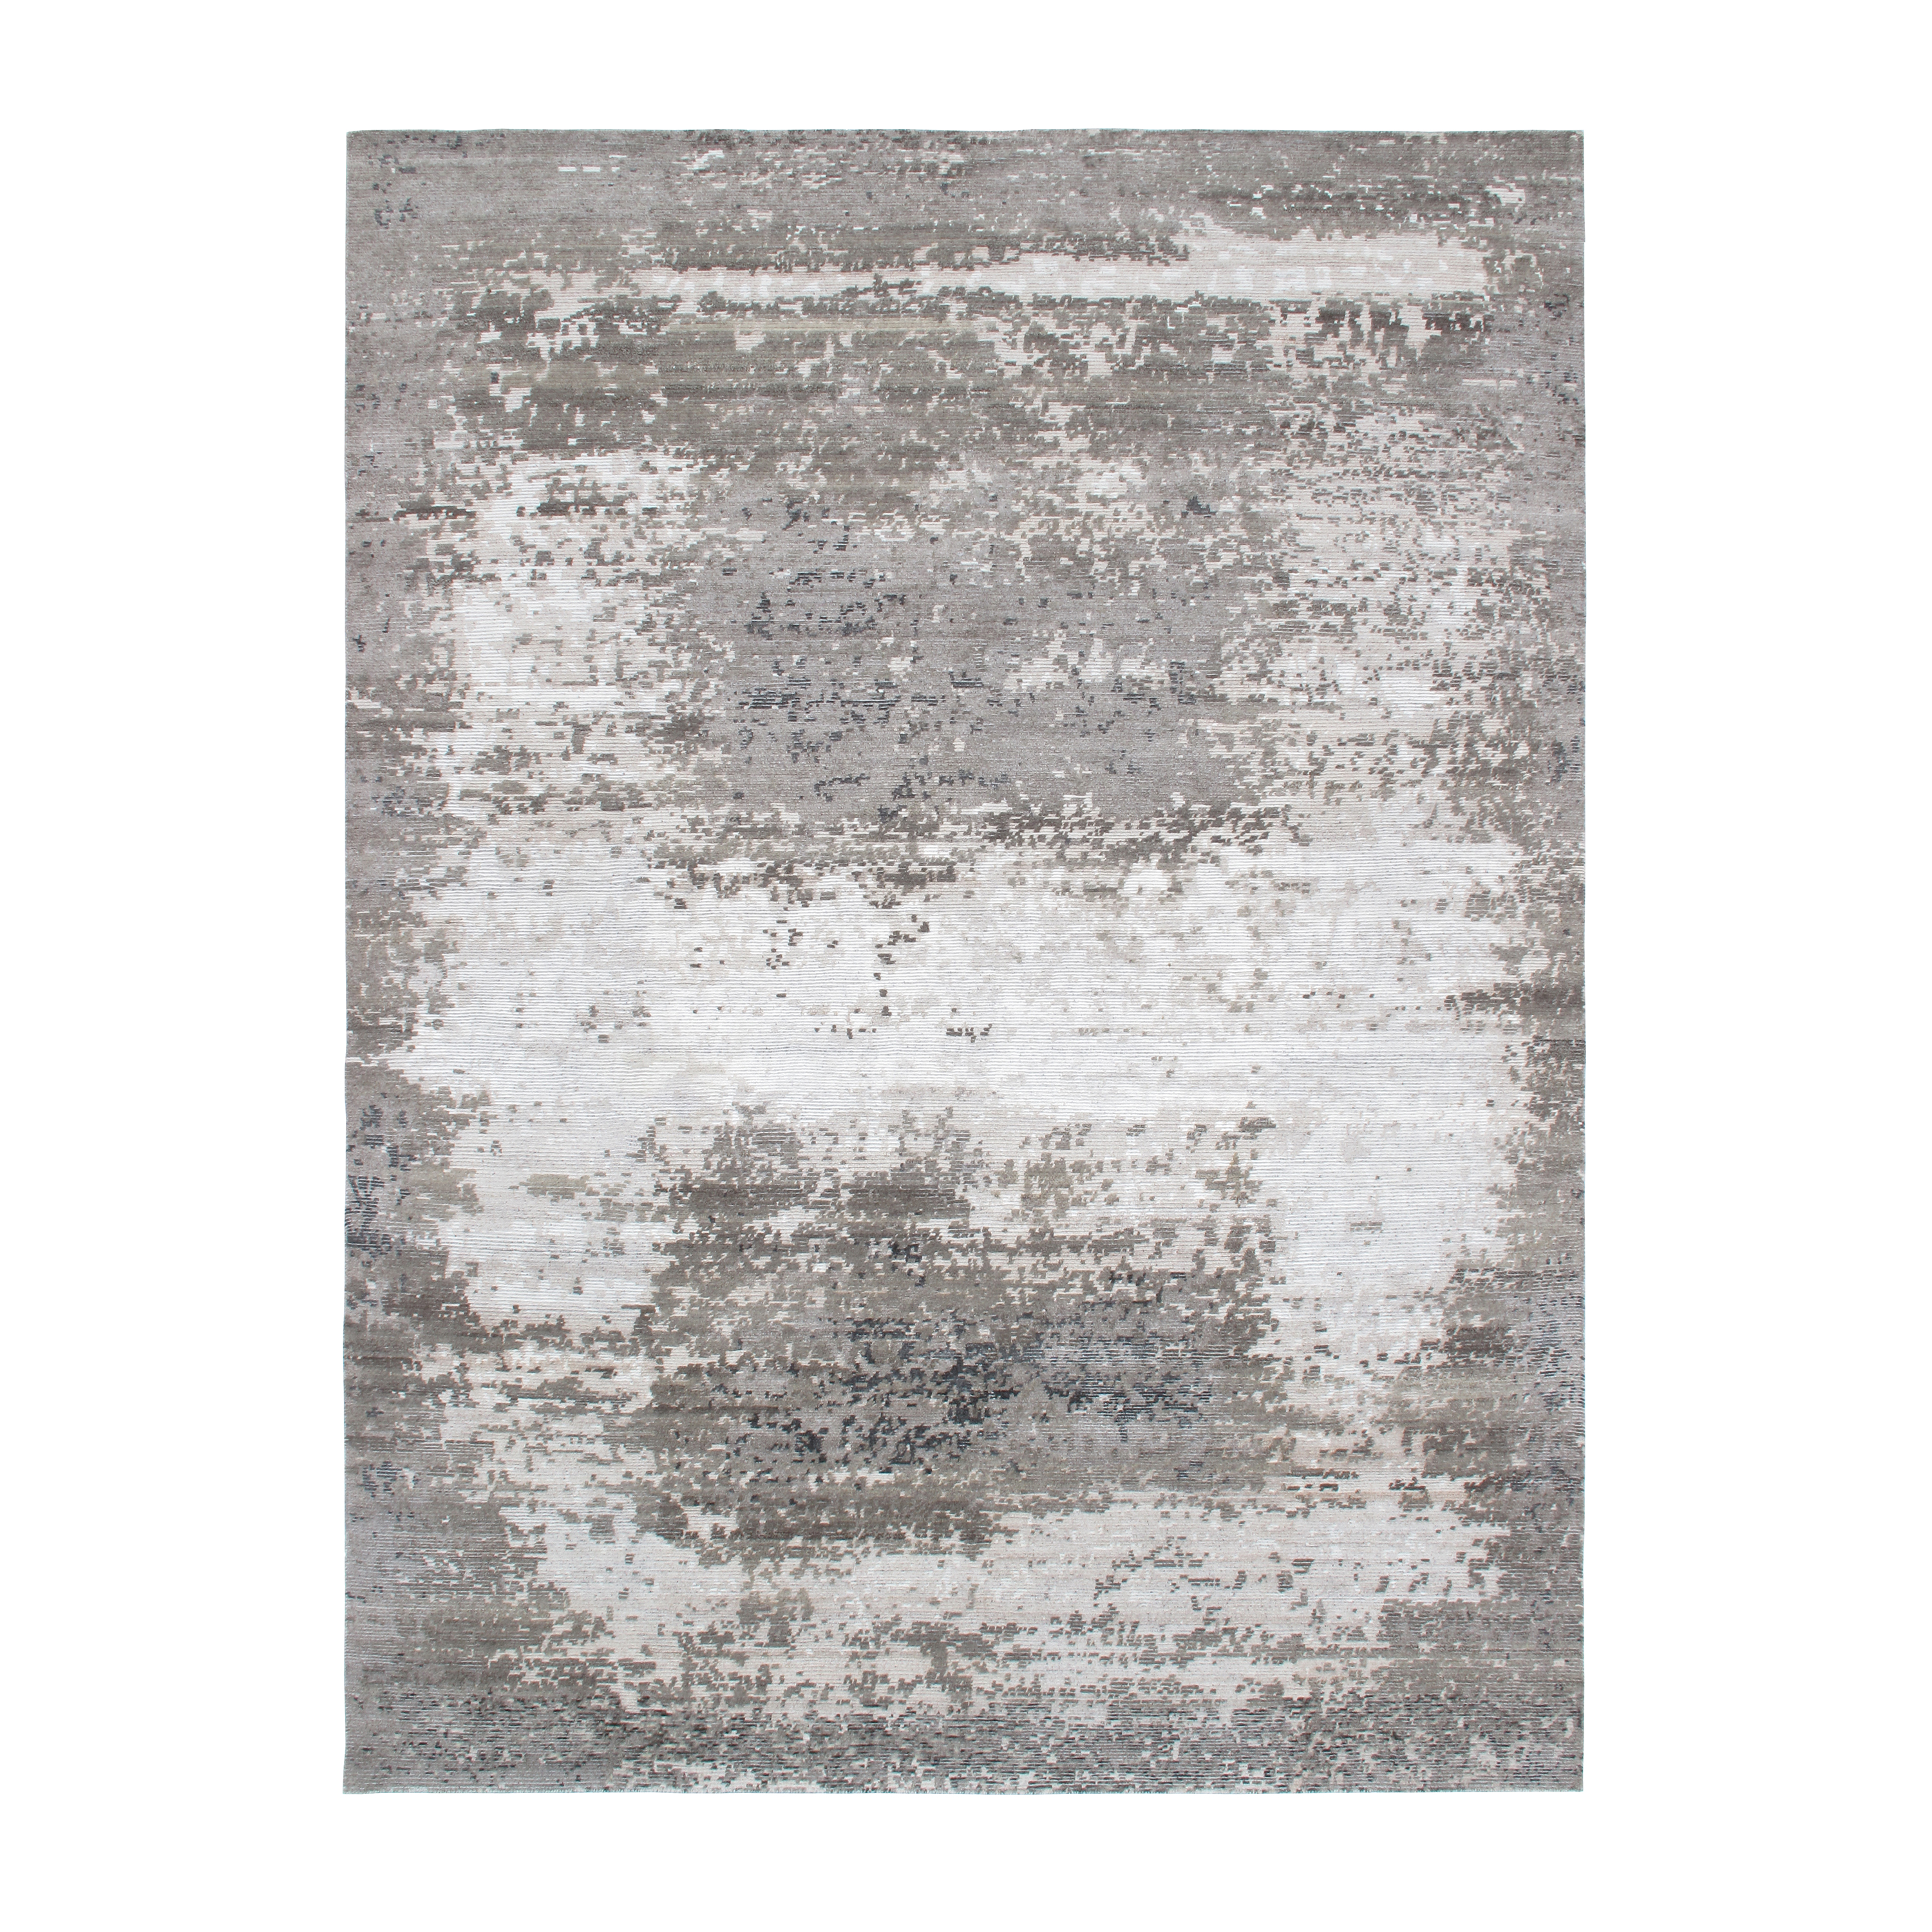 This Kensington rug is hand-knotted and made of wool and bamboo silk.